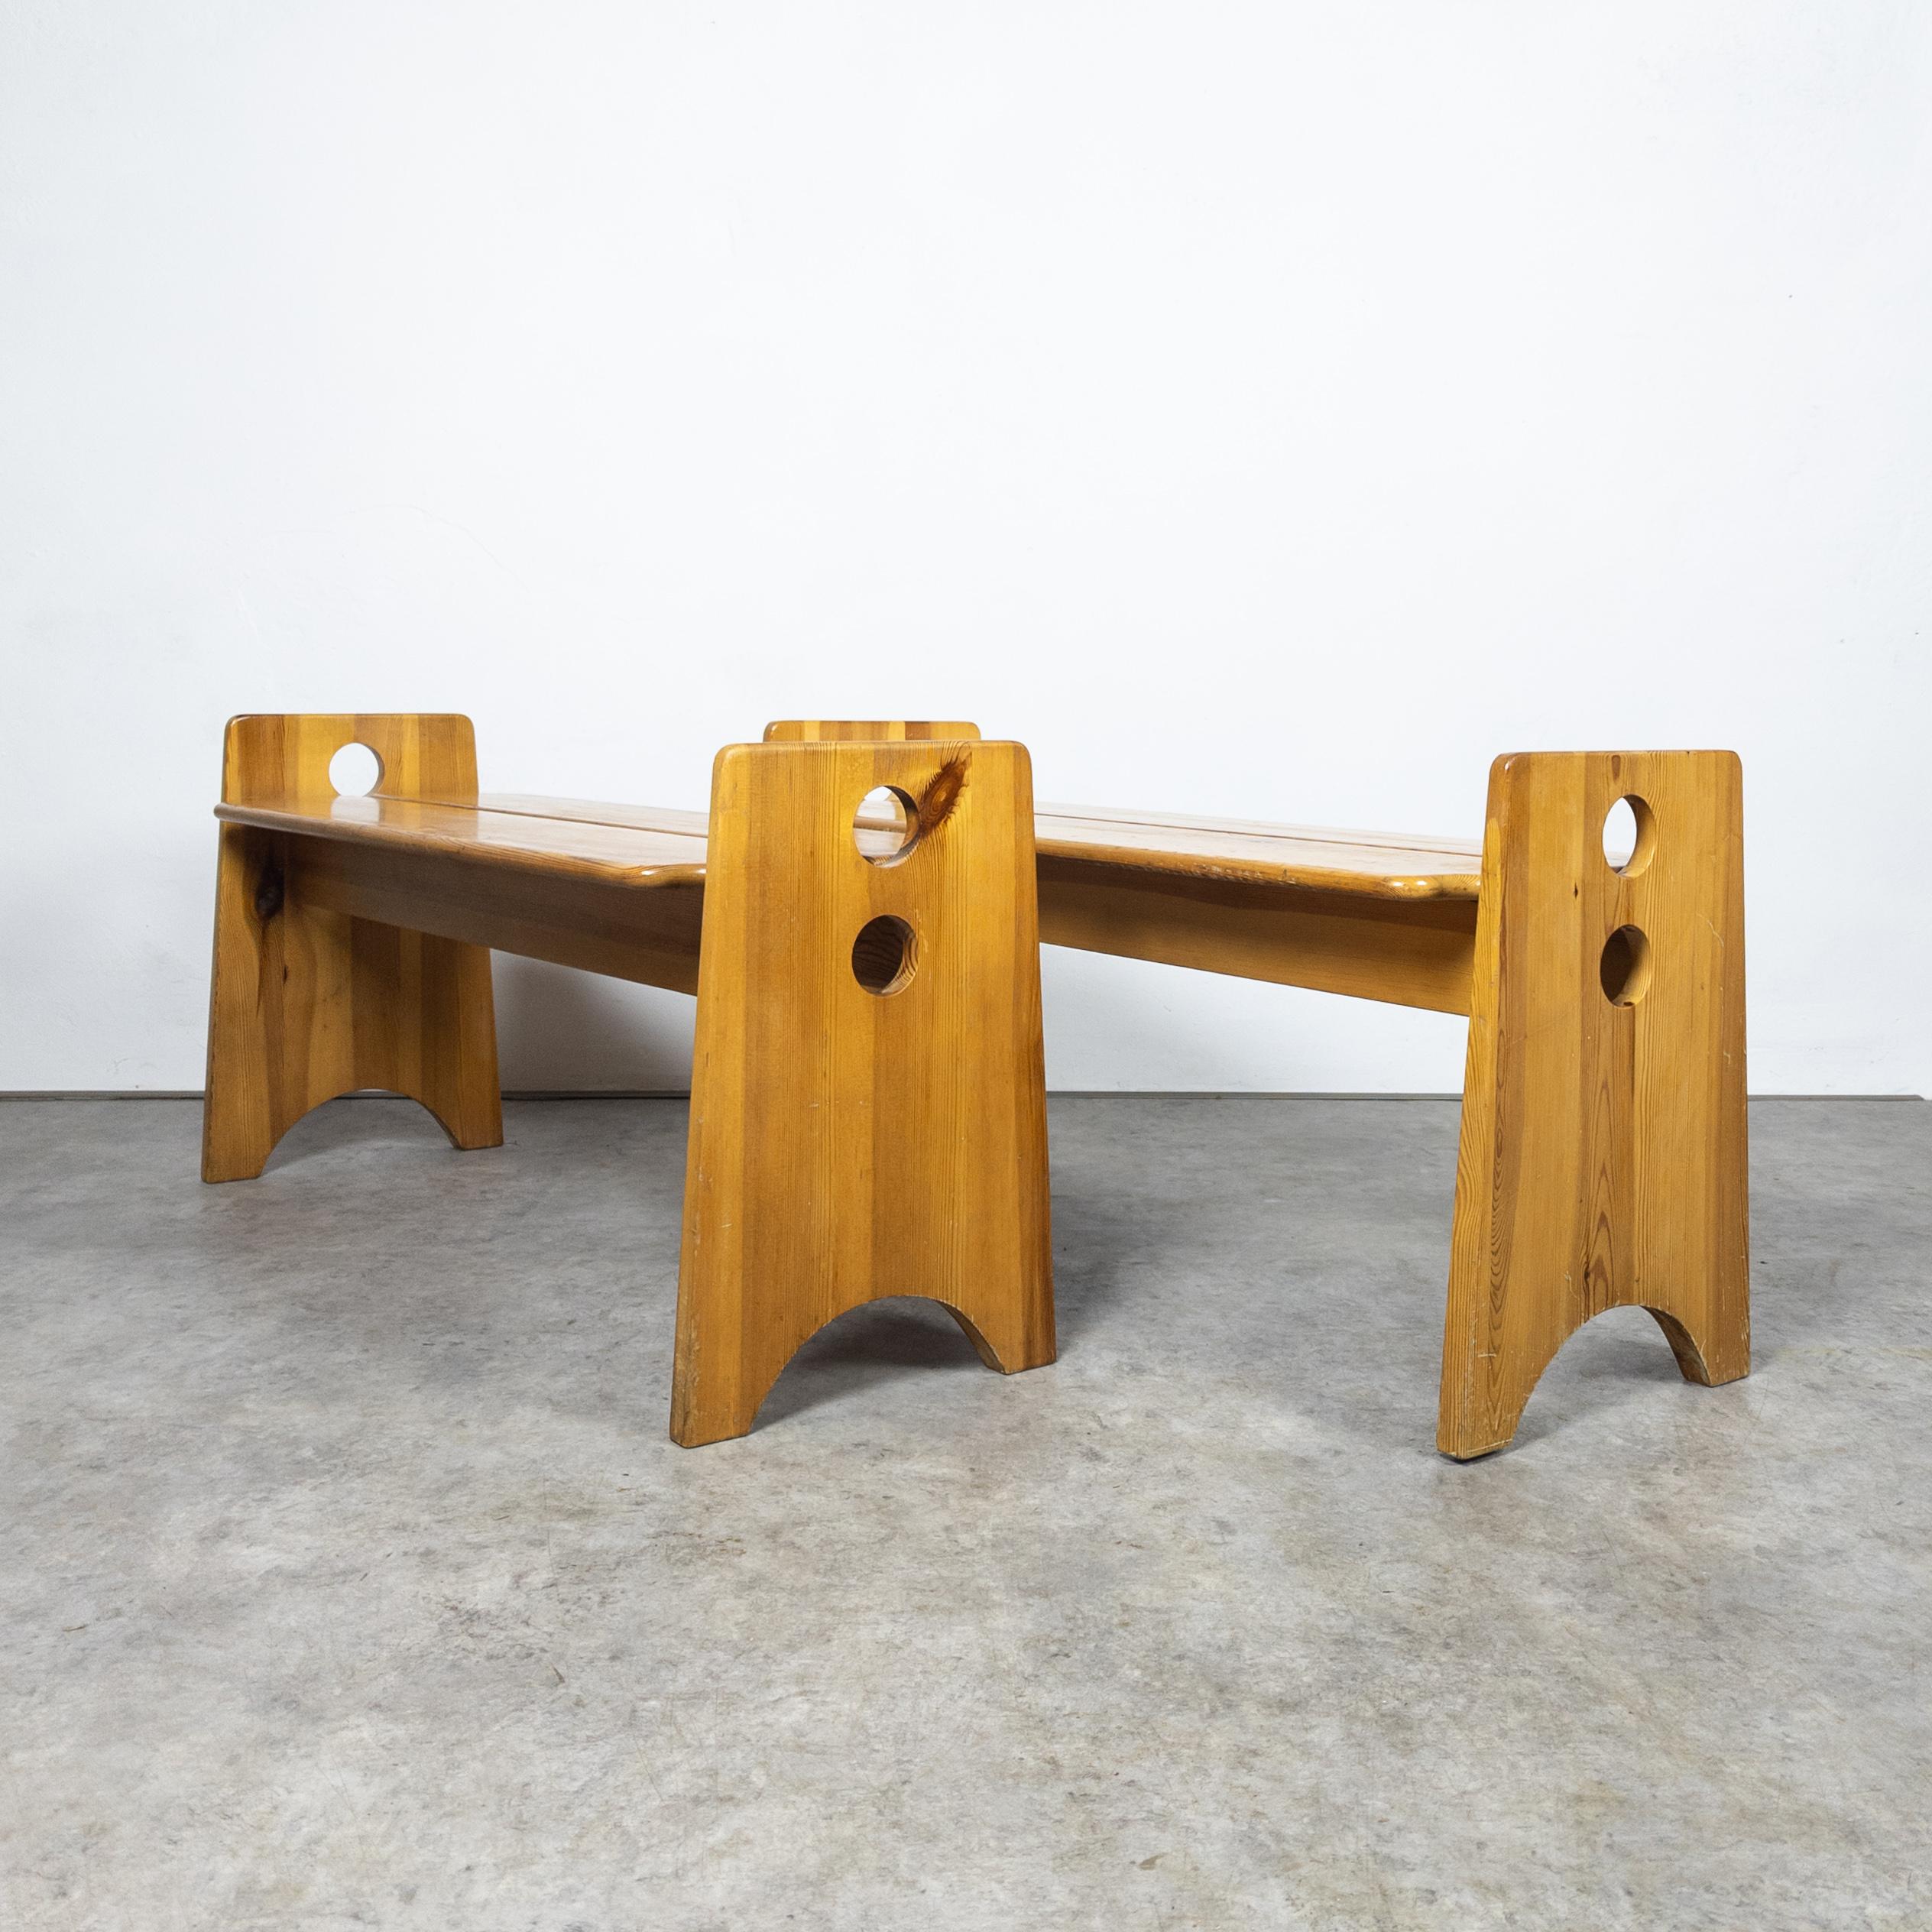 Late 20th Century Sculptural Dining Set in Pine by Gilbert Marklund for Furusnickarn AB, 1970s For Sale